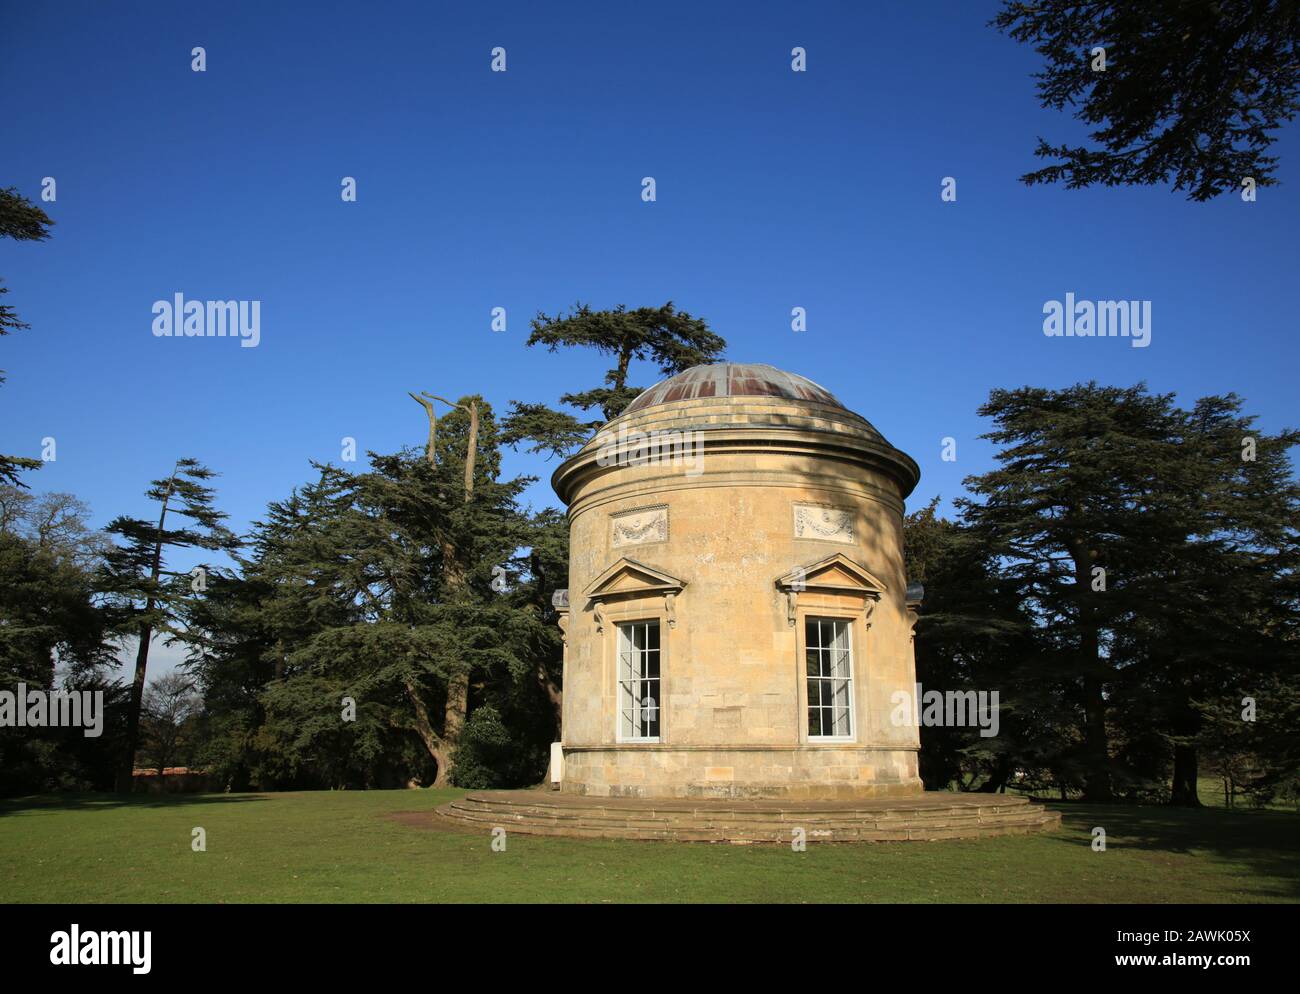 The Rotunda building in the grounds of Croome court, Worcestershire, England, UK. Stock Photo